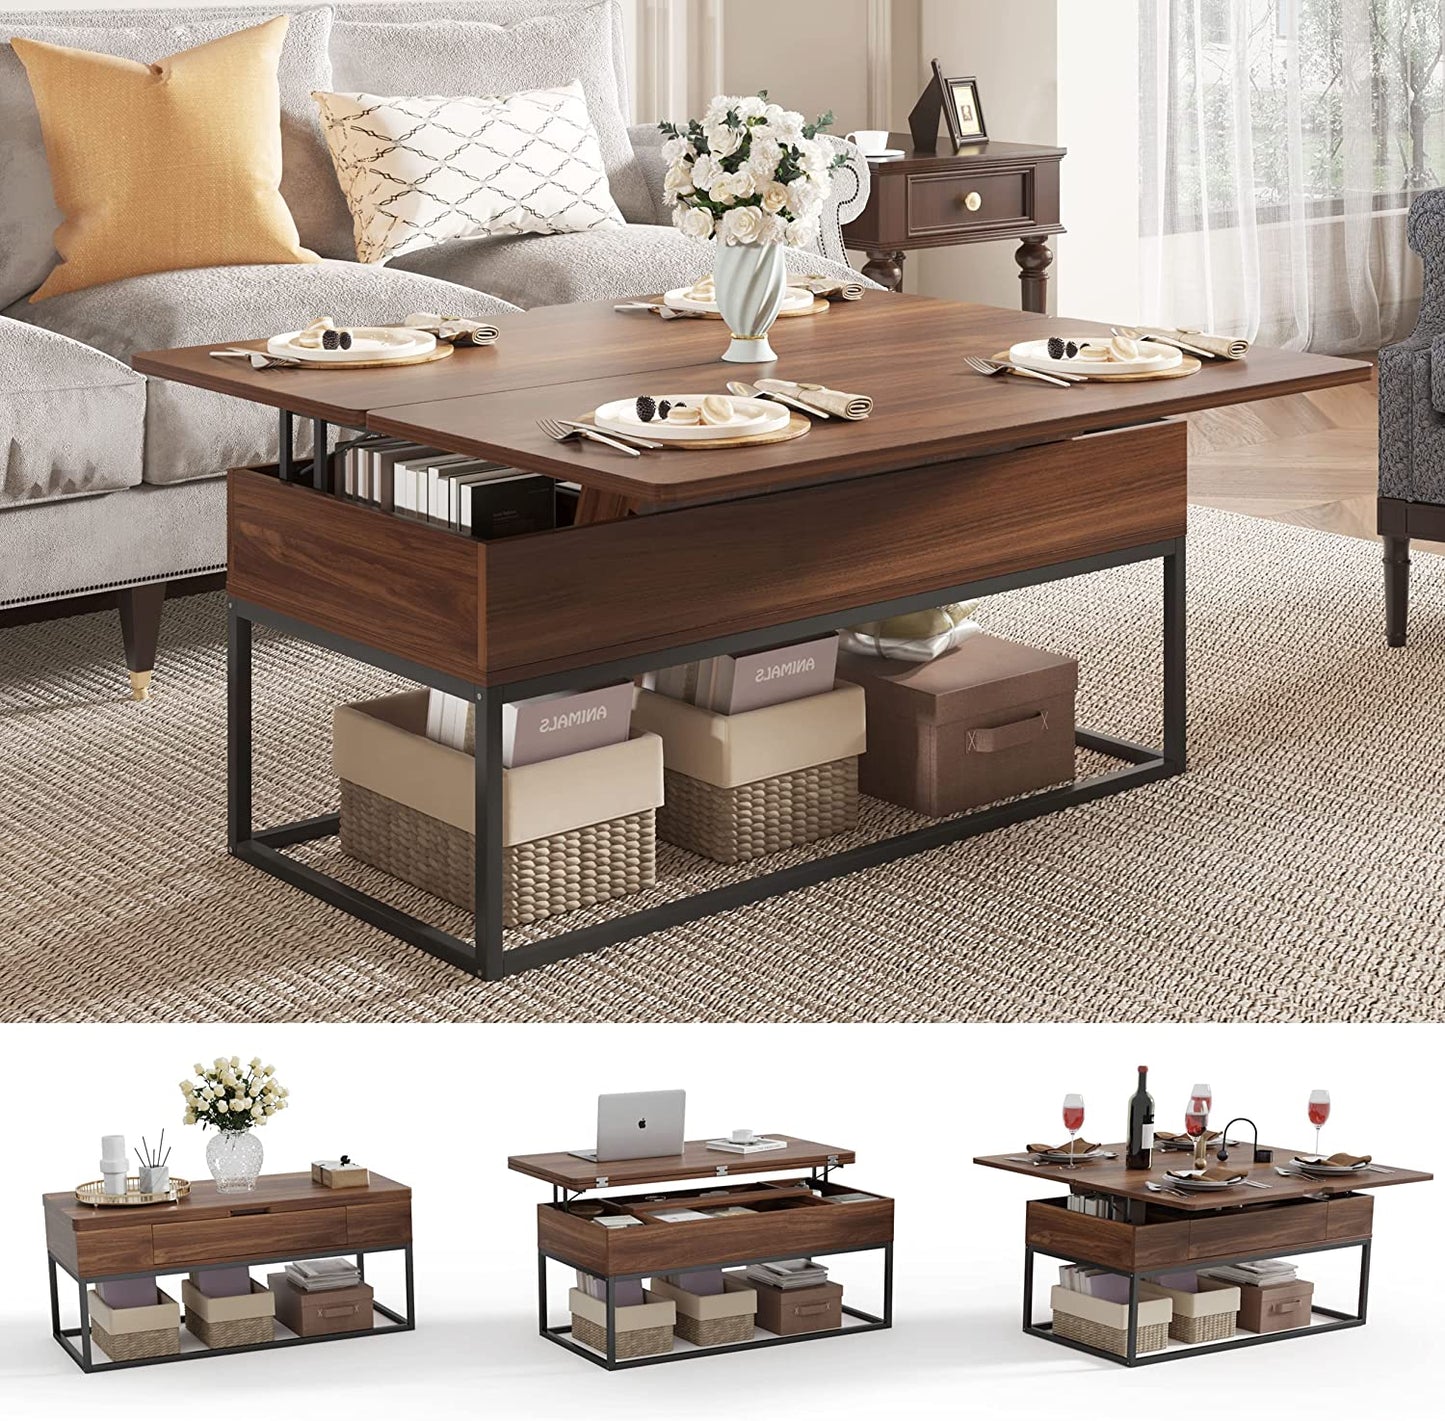 HAIOOU Lift Top Coffee Table, 3in1 Folding Coffee Table